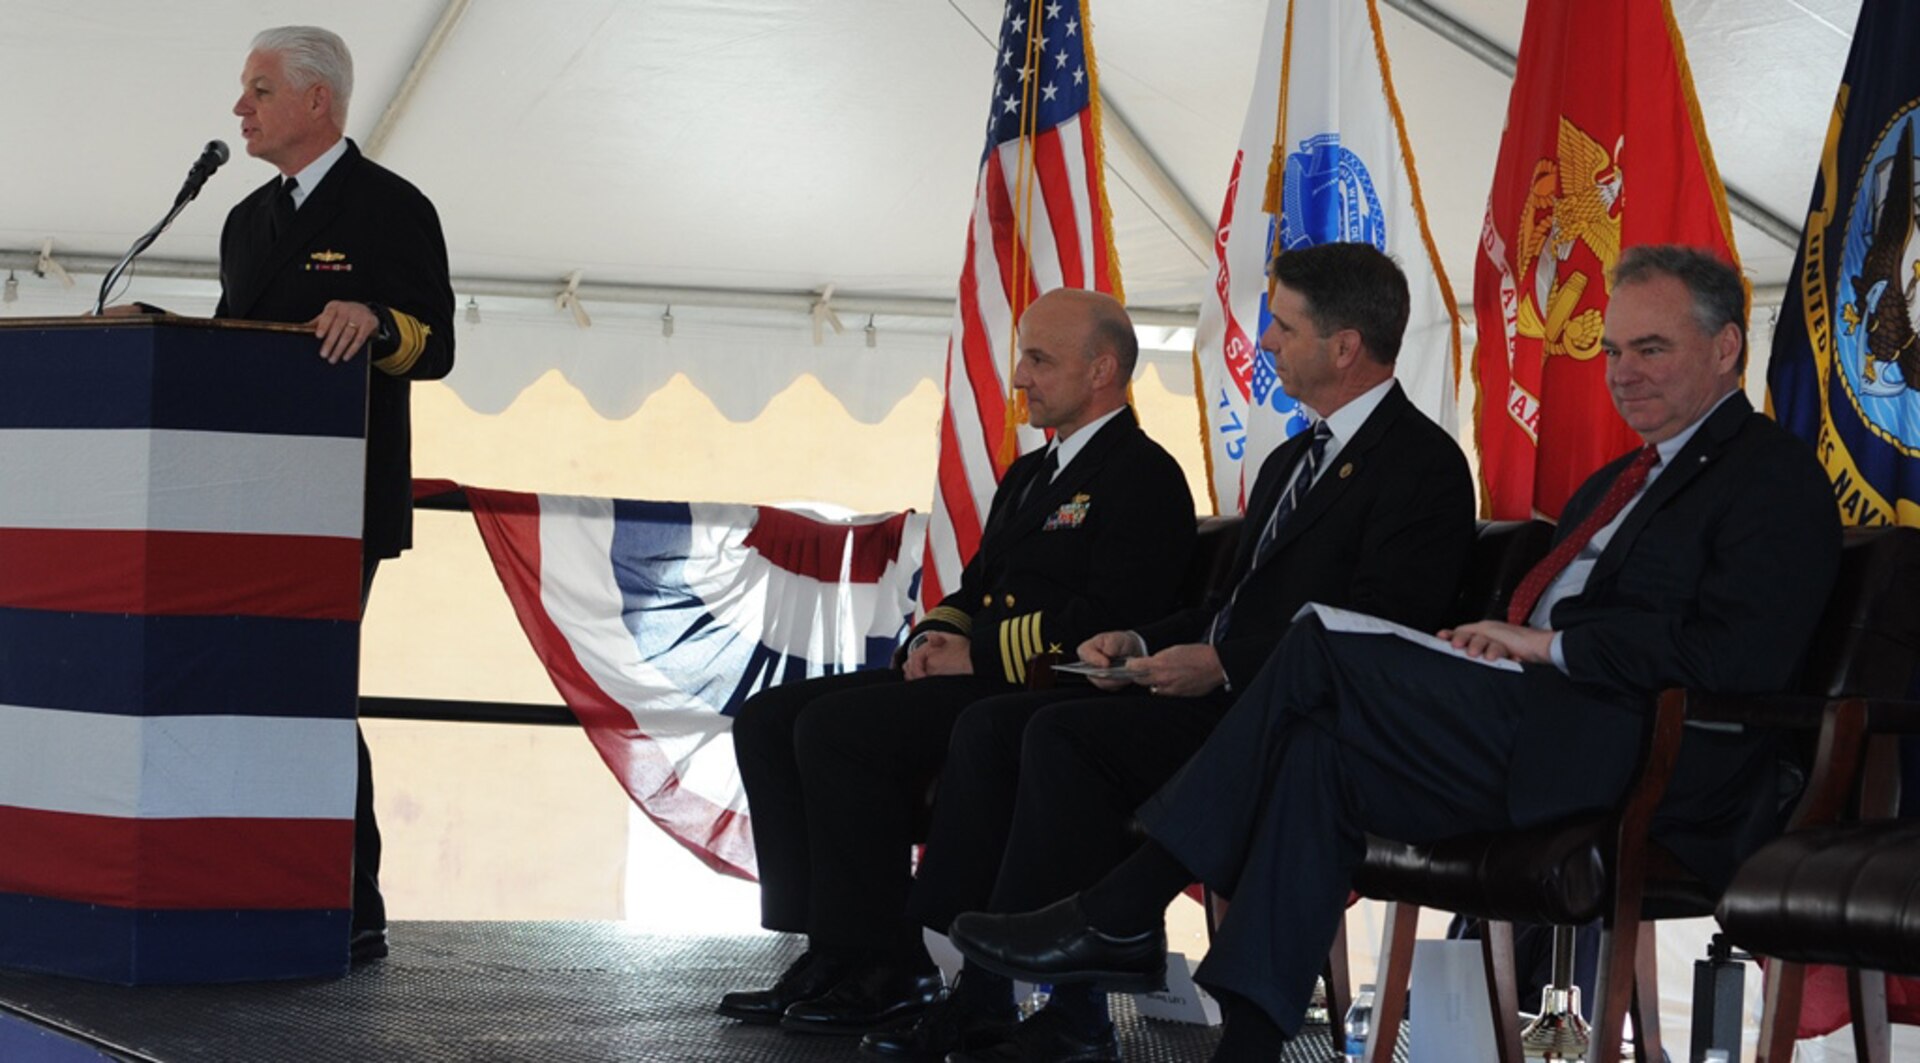 DAHLGREN, Va. - Vice Admiral Terry Benedict, Navy Strategic Systems Programs (SSP) director, tells Naval Surface Warfare Center Dahlgren Division (NSWCDD) personnel that their efforts are "absolutely critical to the defense of our country" during a ground breaking ceremony for the new Missile Support Facility, March 18. "Once completed, this $22.7 million effort, 58,000-square-foot facility is going to house the SLBM (Submarine Launched Ballistic Missile) program offices and the labs for over 300 outstanding professionals in the fields of engineering, physics, math, statistics, computer science, and the list goes on," said Benedict, the event's keynote speaker, as (left to right) NSWCDD Commanding Officer Capt. Brian Durant, Rep. Rob Wittman, R-Va., and Sen. Tim Kaine, D-Va., listen. NSWCDD has been a key member of the SLBM team since the program’s inception, and will continue throughout the next generation of submarine - the new Ohio-Replacement Program.